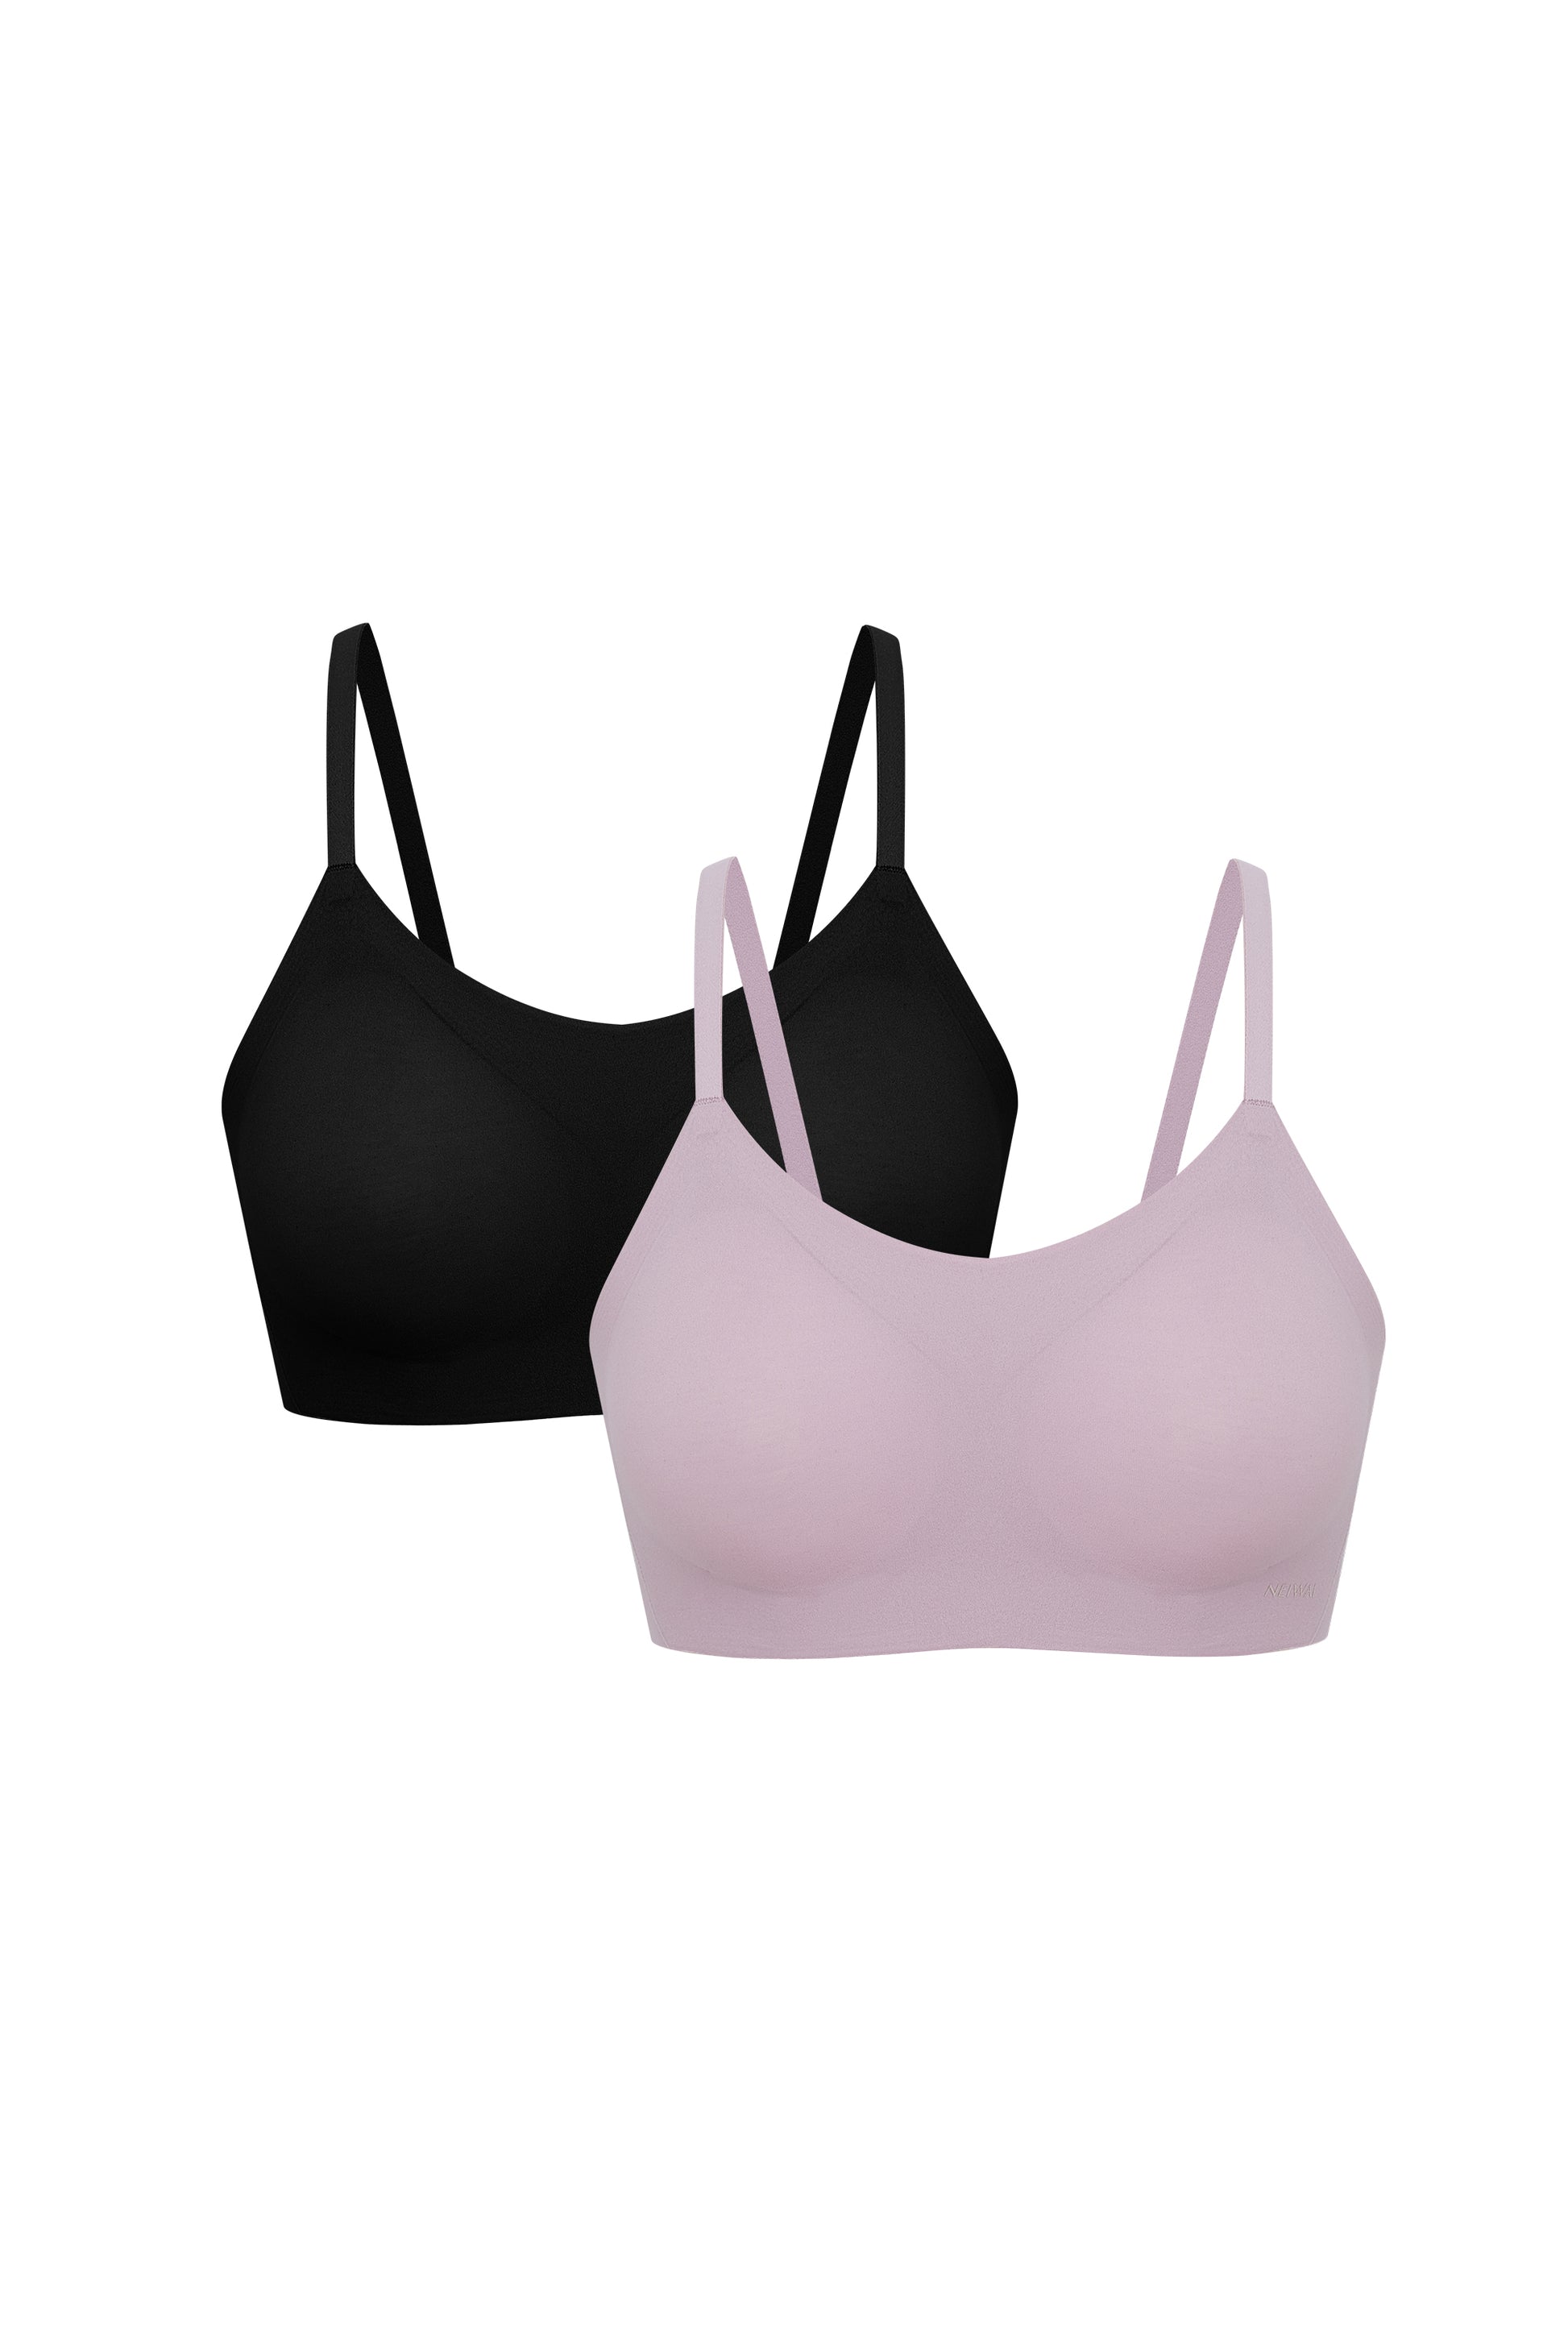 Cotton comfort bra without underwiring in cotton mix, white